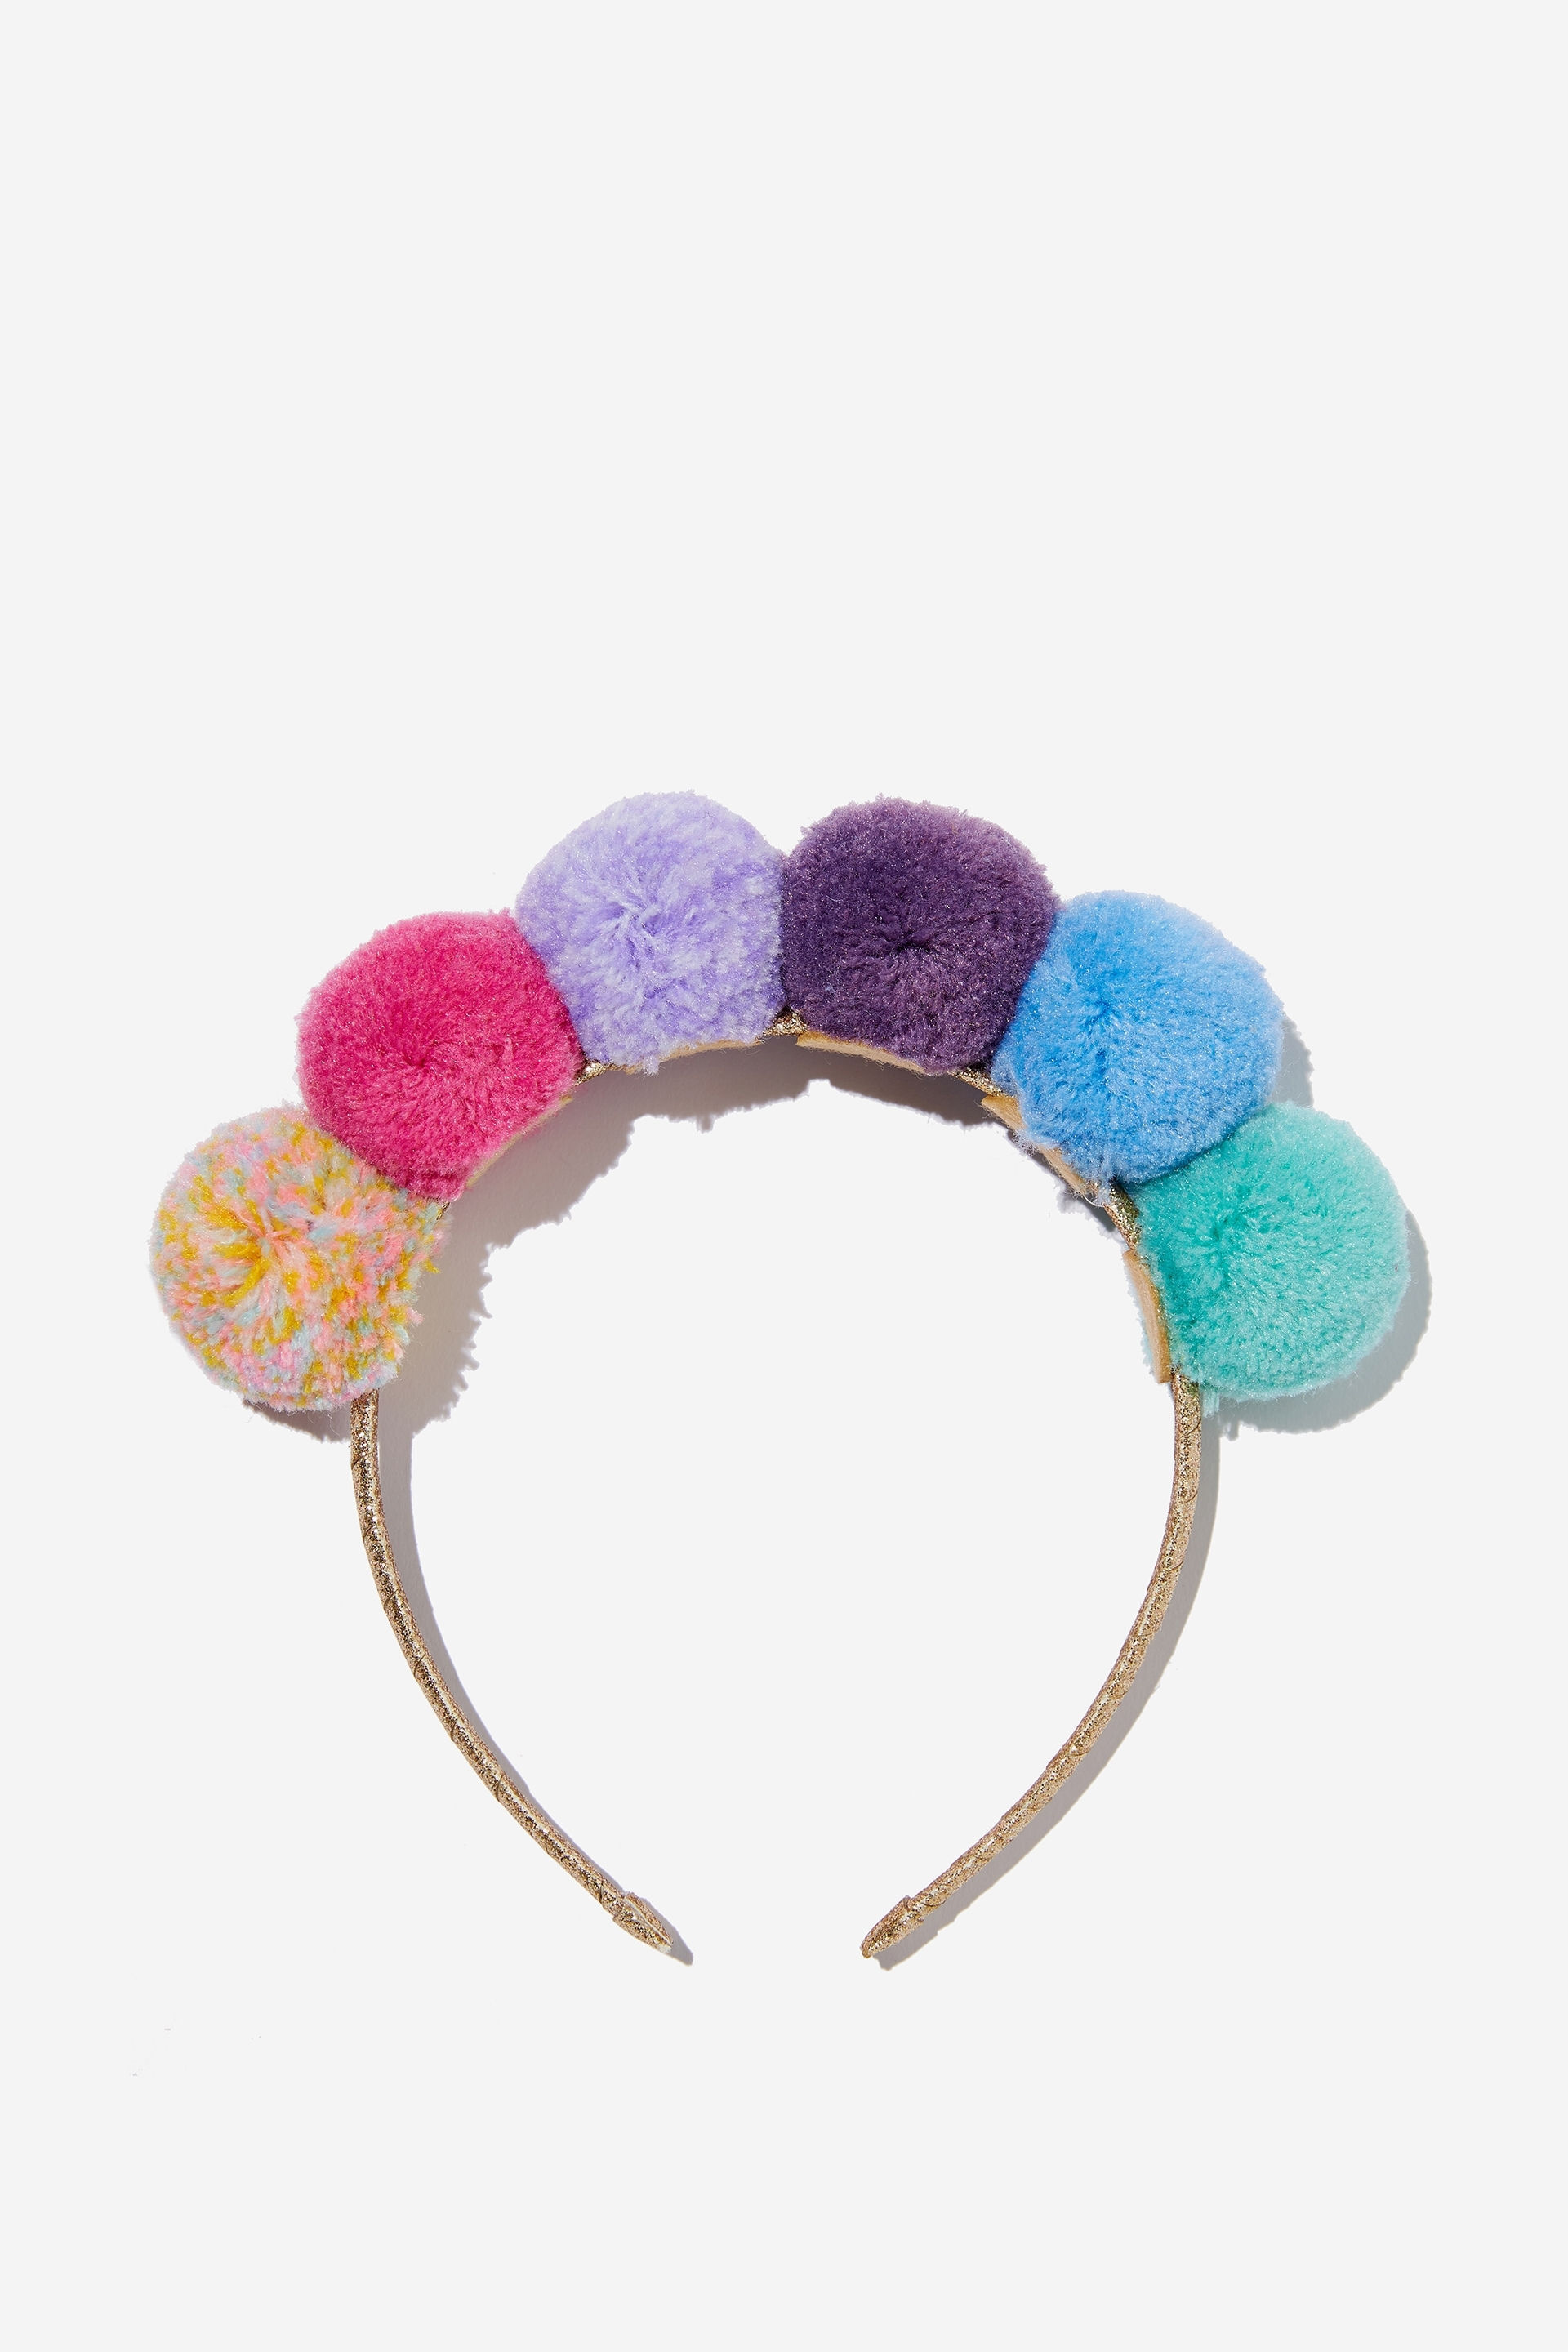 Shoes & Accessories Hair Accessories | Pom Pom Headband - AN09979